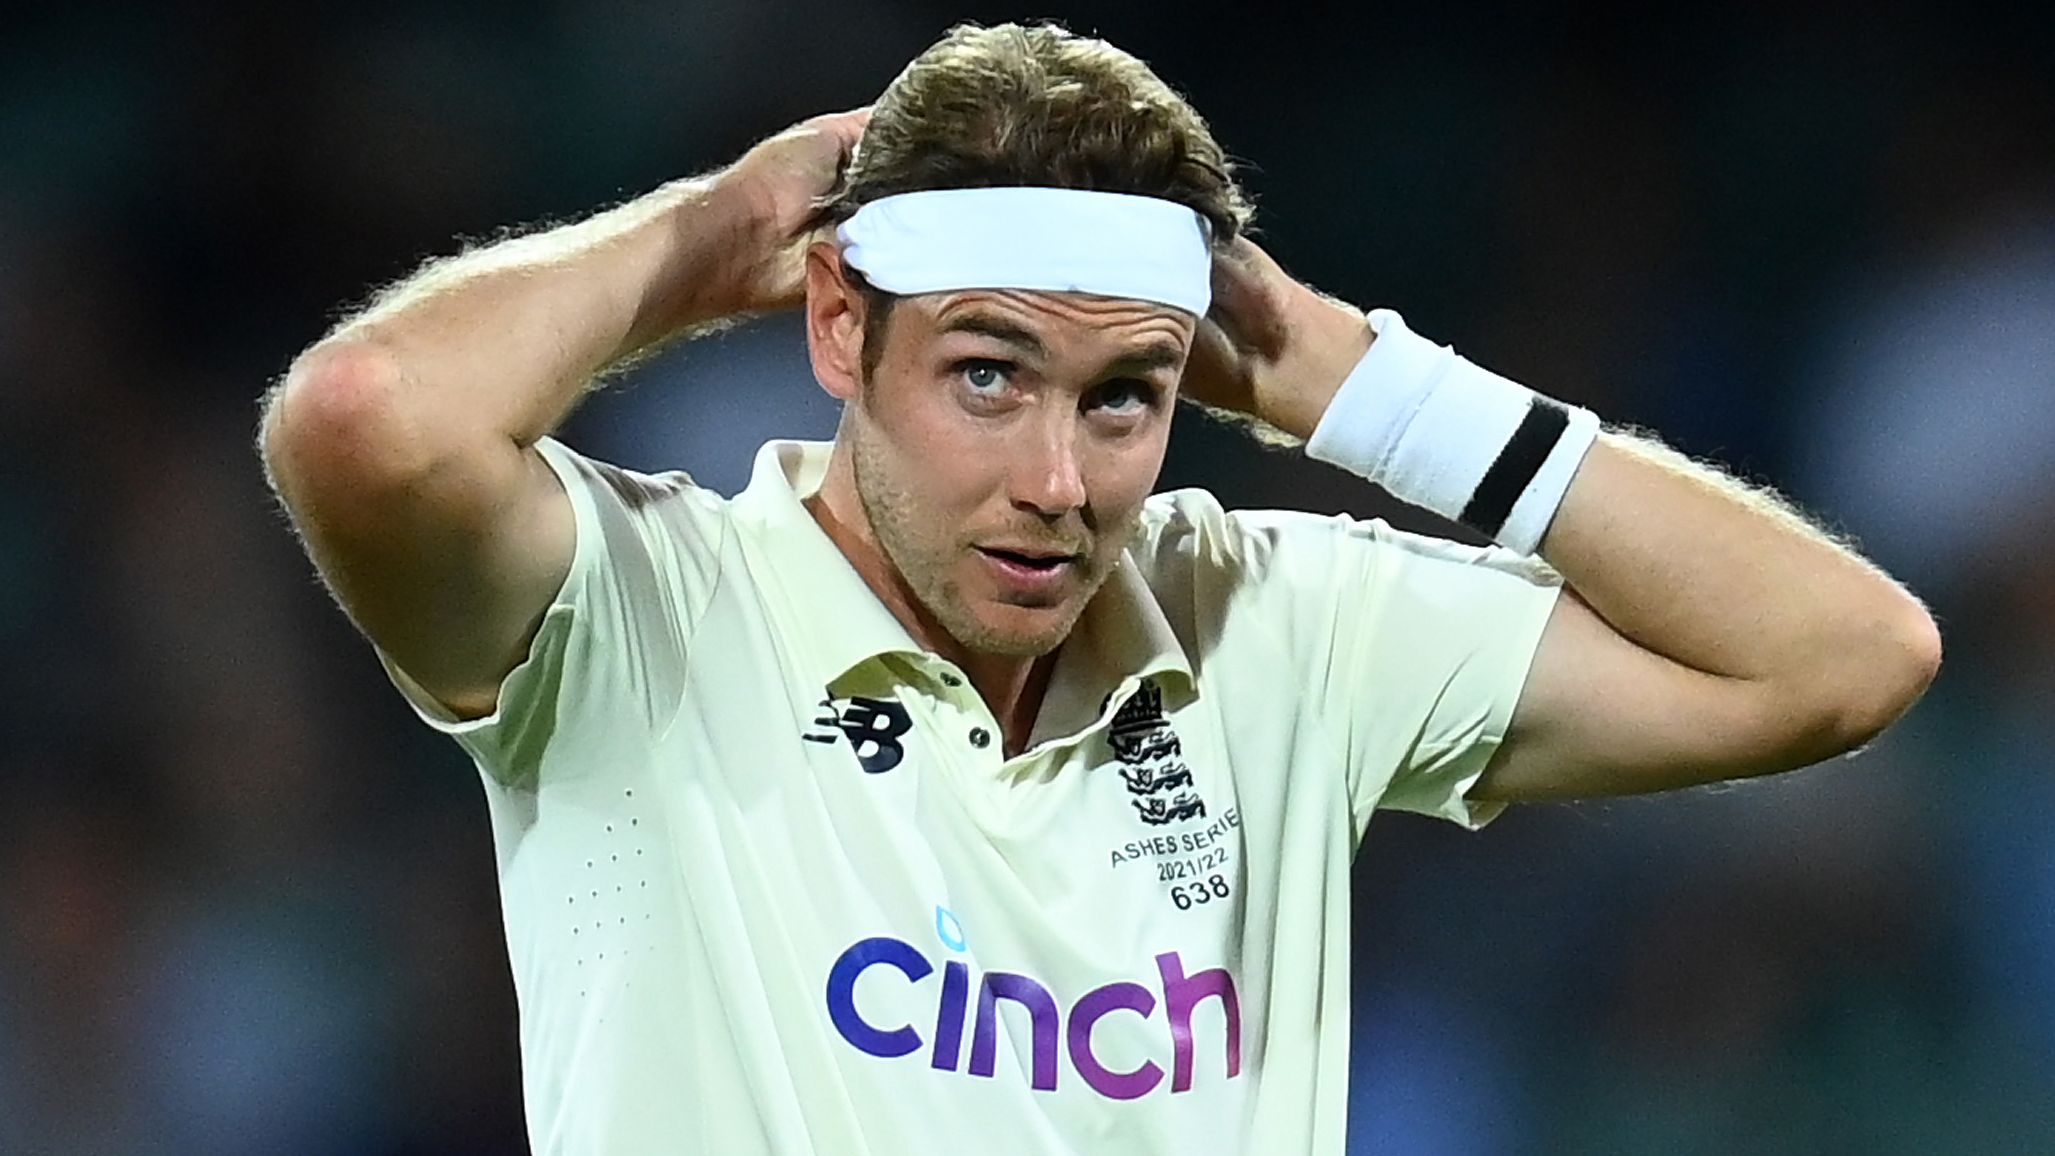 ADELAIDE, AUSTRALIA - DECEMBER 16:  Stuart Broad of England adjusts his headband during day one of the Second Test match in the Ashes series between Australia and England at the Adelaide Oval on December 16, 2021 in Adelaide, Australia. (Photo by Quinn Rooney/Getty Images)